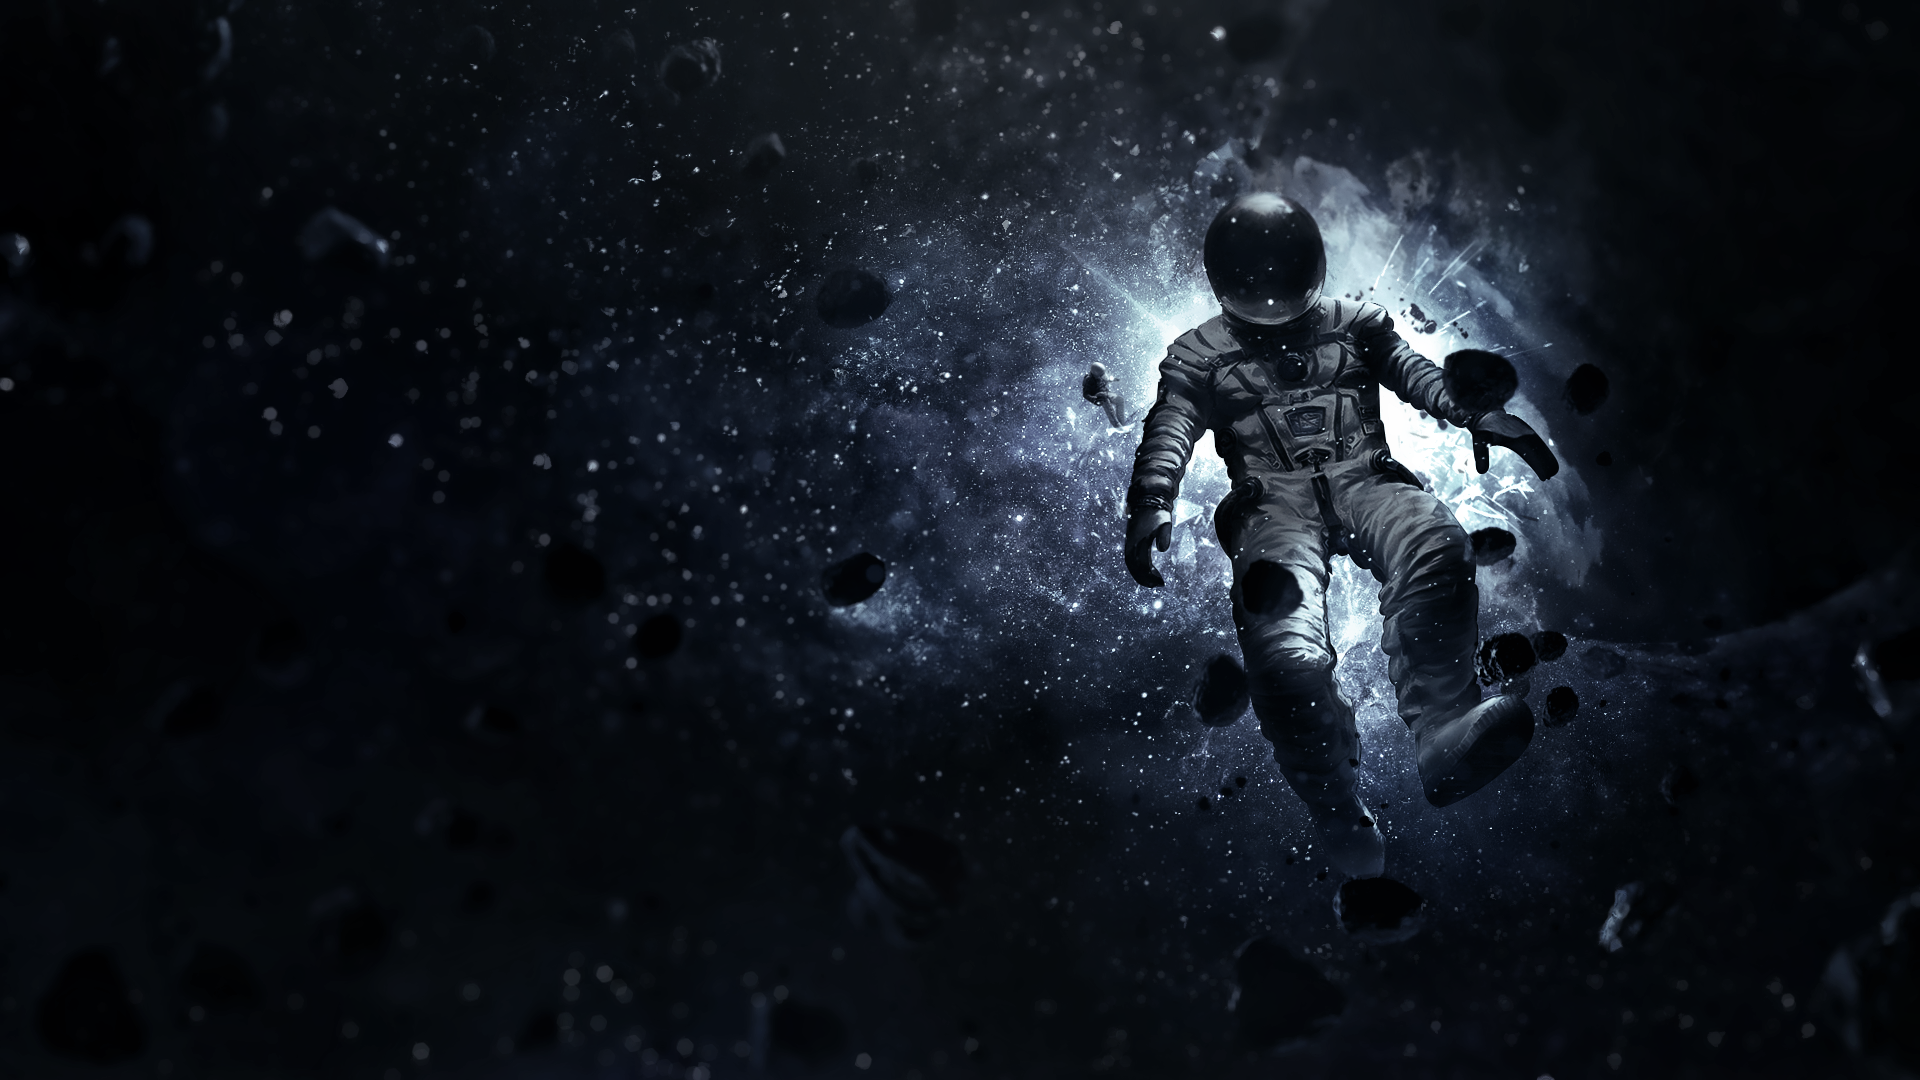 Imgur The most awesome images on the Internet Astronaut 1920x1080